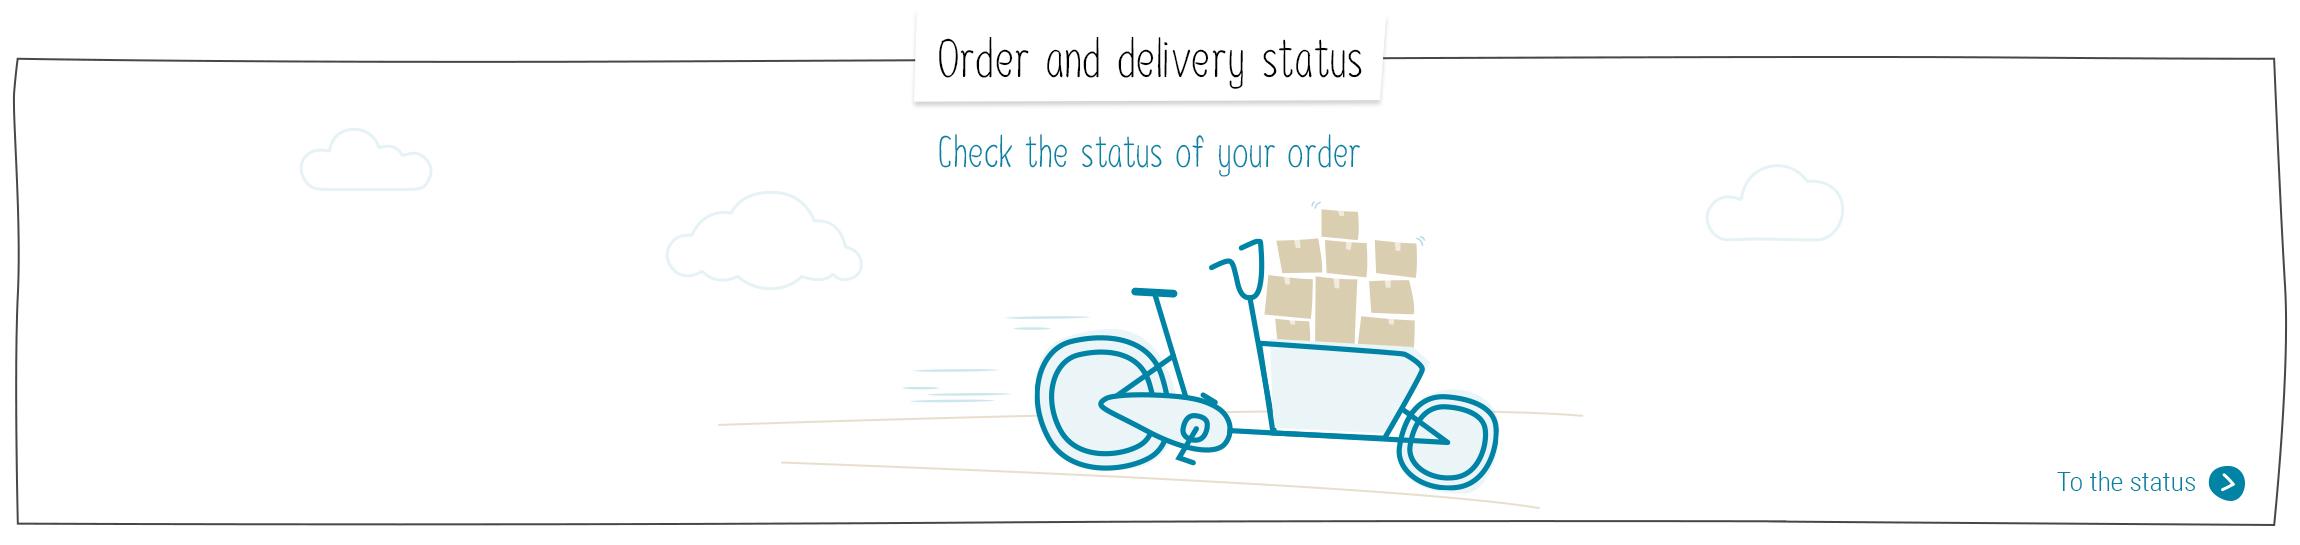 Order and delivery status